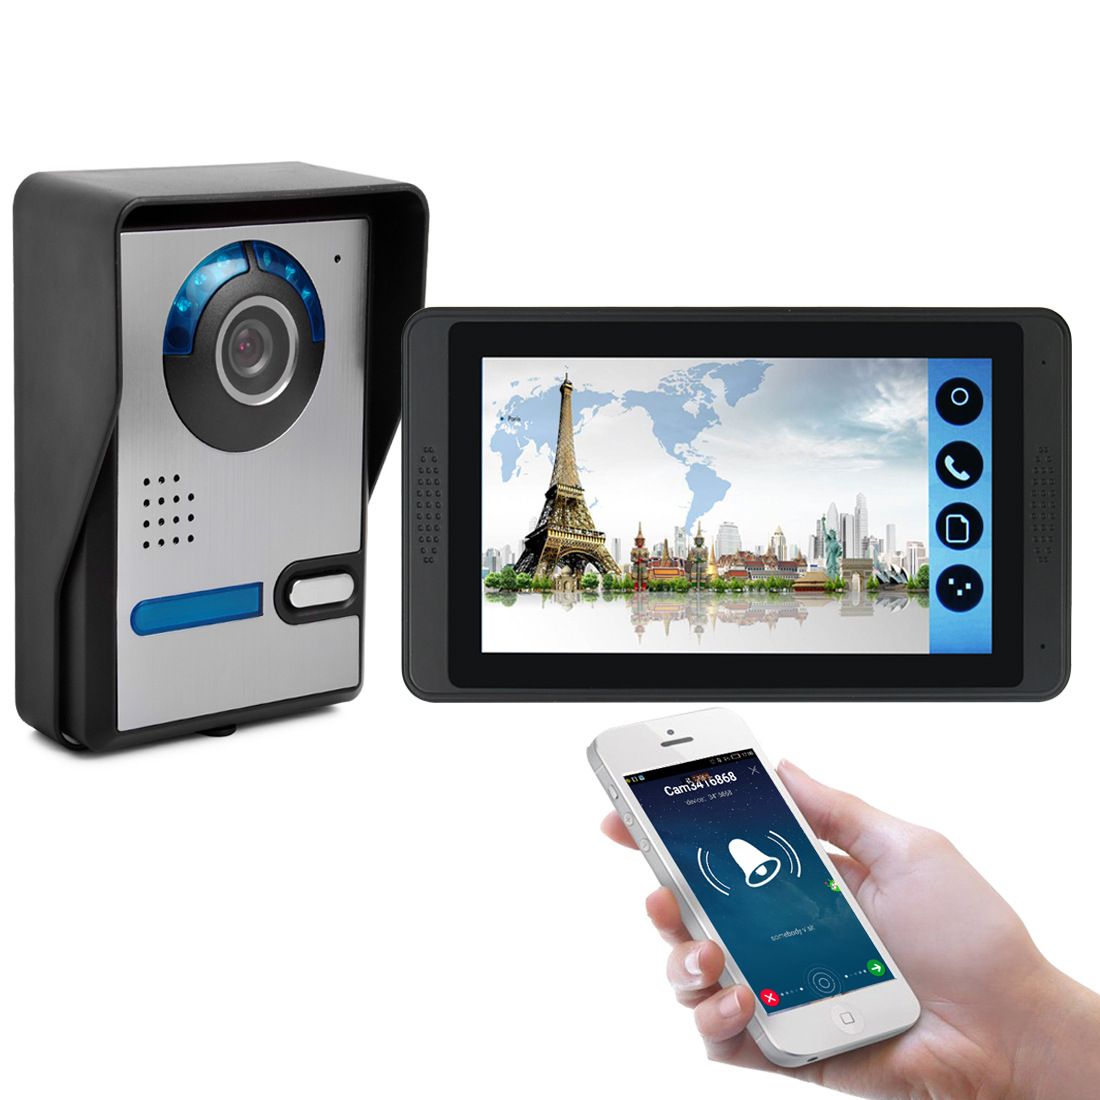 ENNIO-7-Inch-Capacitive-Touch-Wireless-Wired-Video-Doorbell-Video-Camera-Phone-Remote-Call-Unlock-Vi-1615826